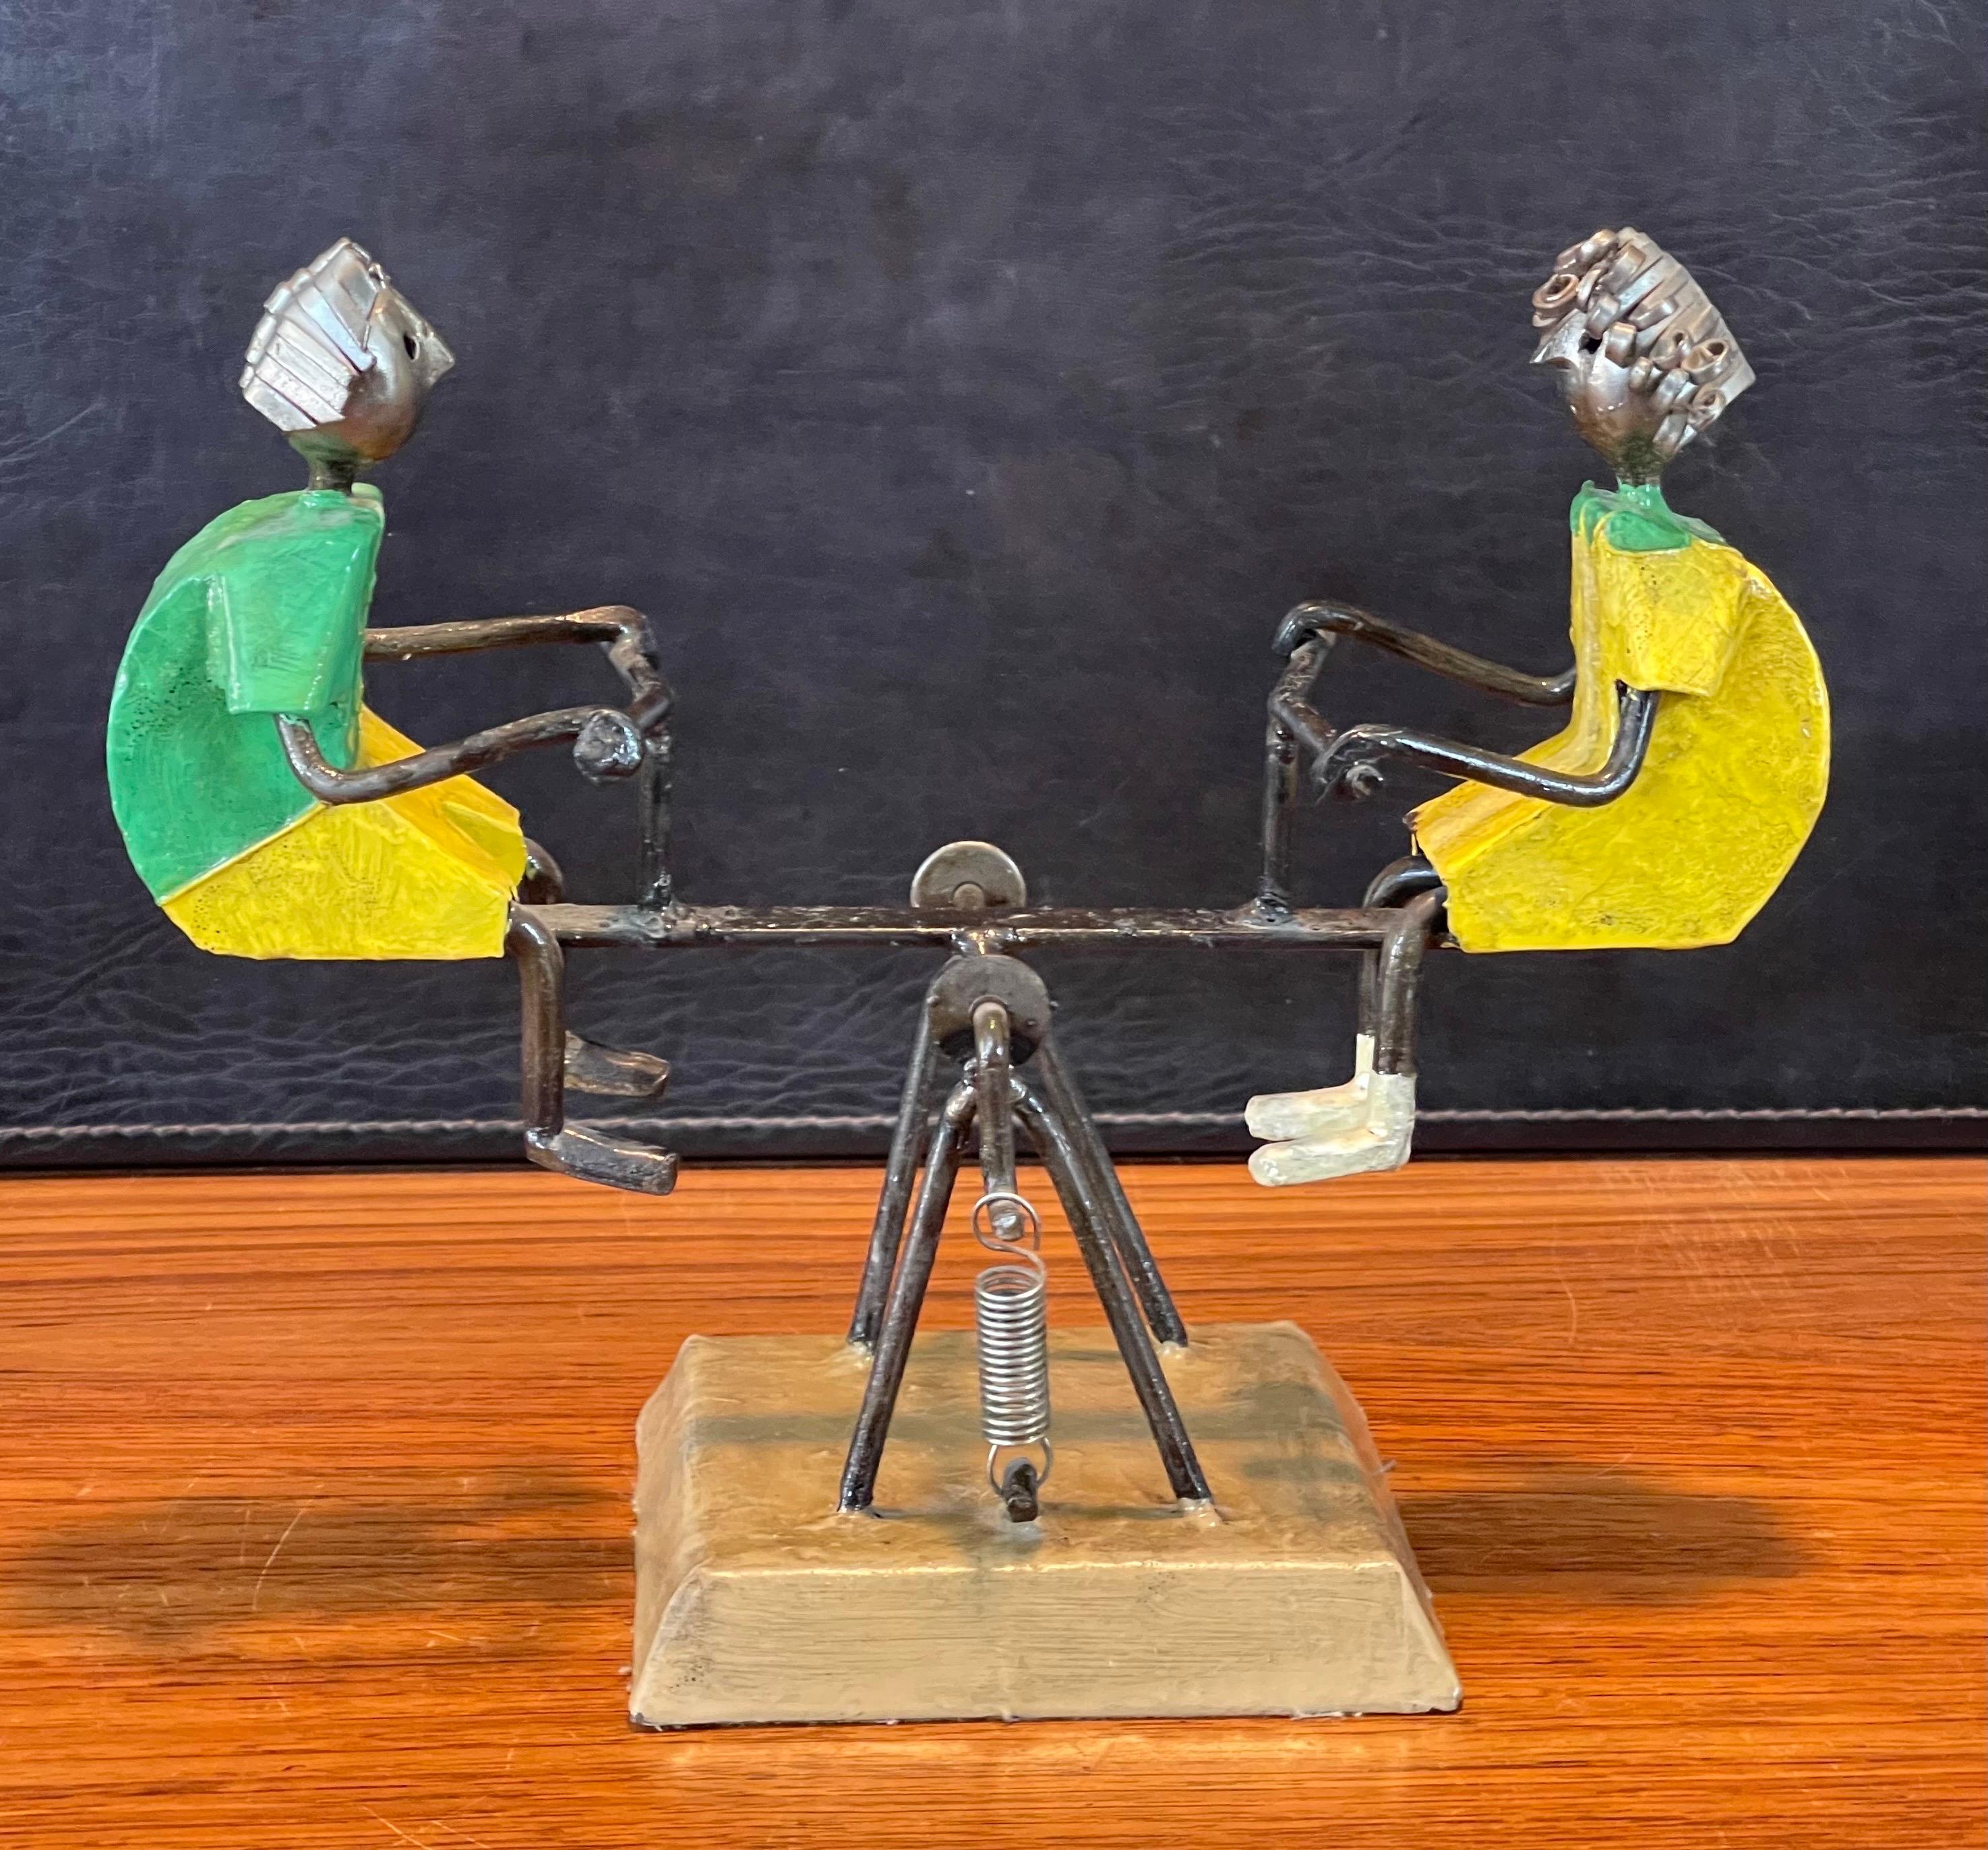 Mid-Century Modern Eclectic Painted Metal See Saw /Teeter Totter Sculpture by Manuel Felguerez For Sale